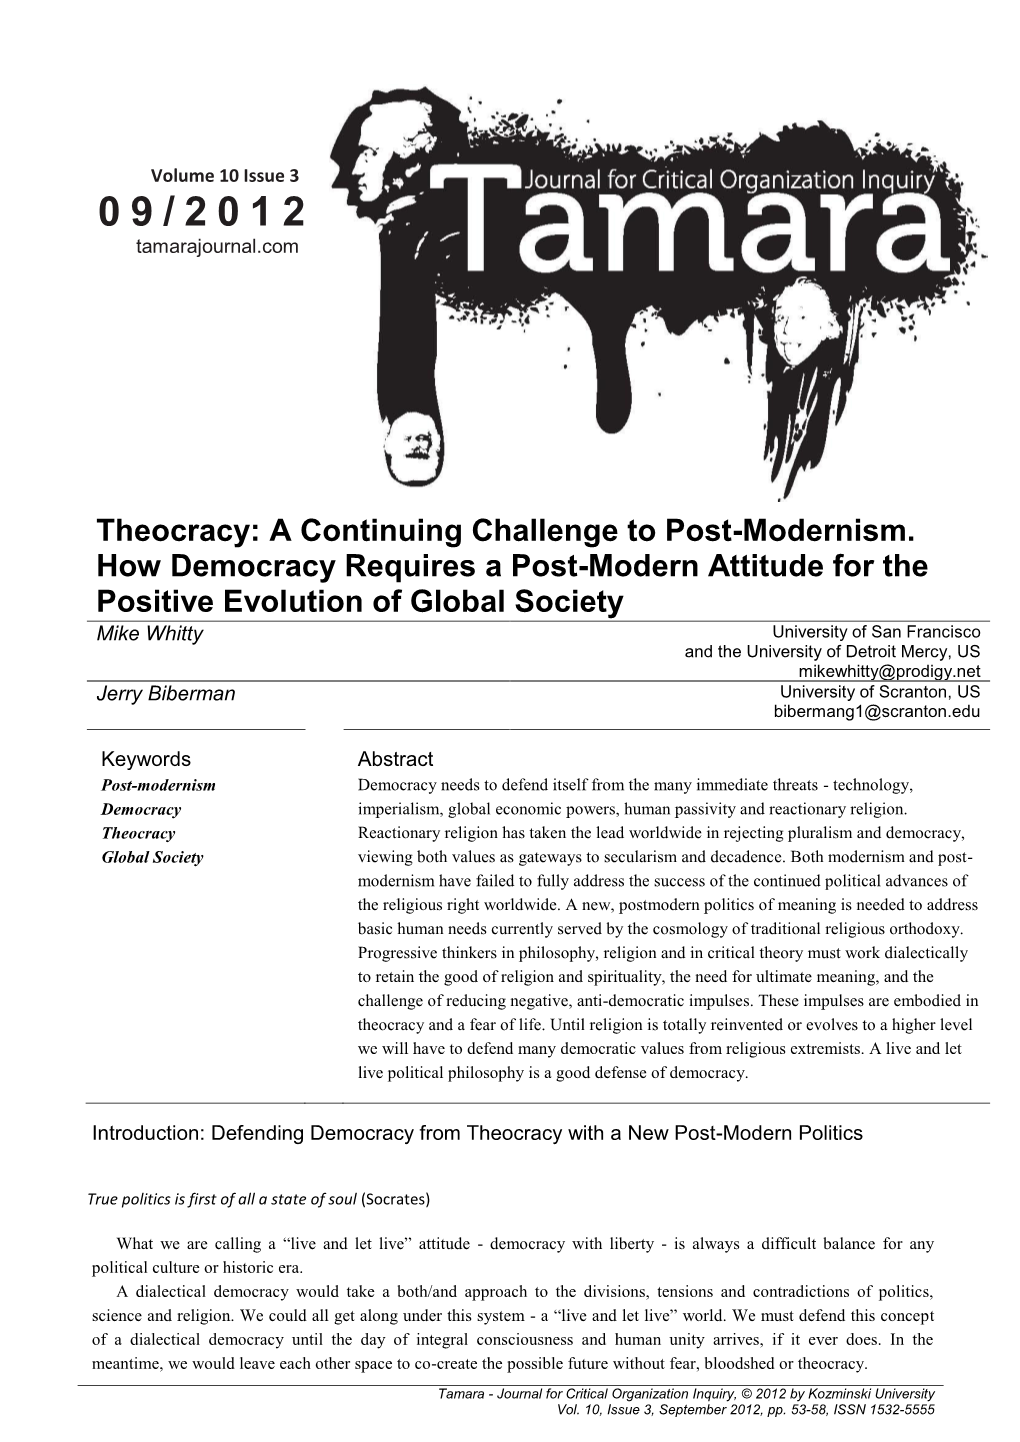 Theocracy: a Continuing Challenge to Post-Modernism. How Democracy